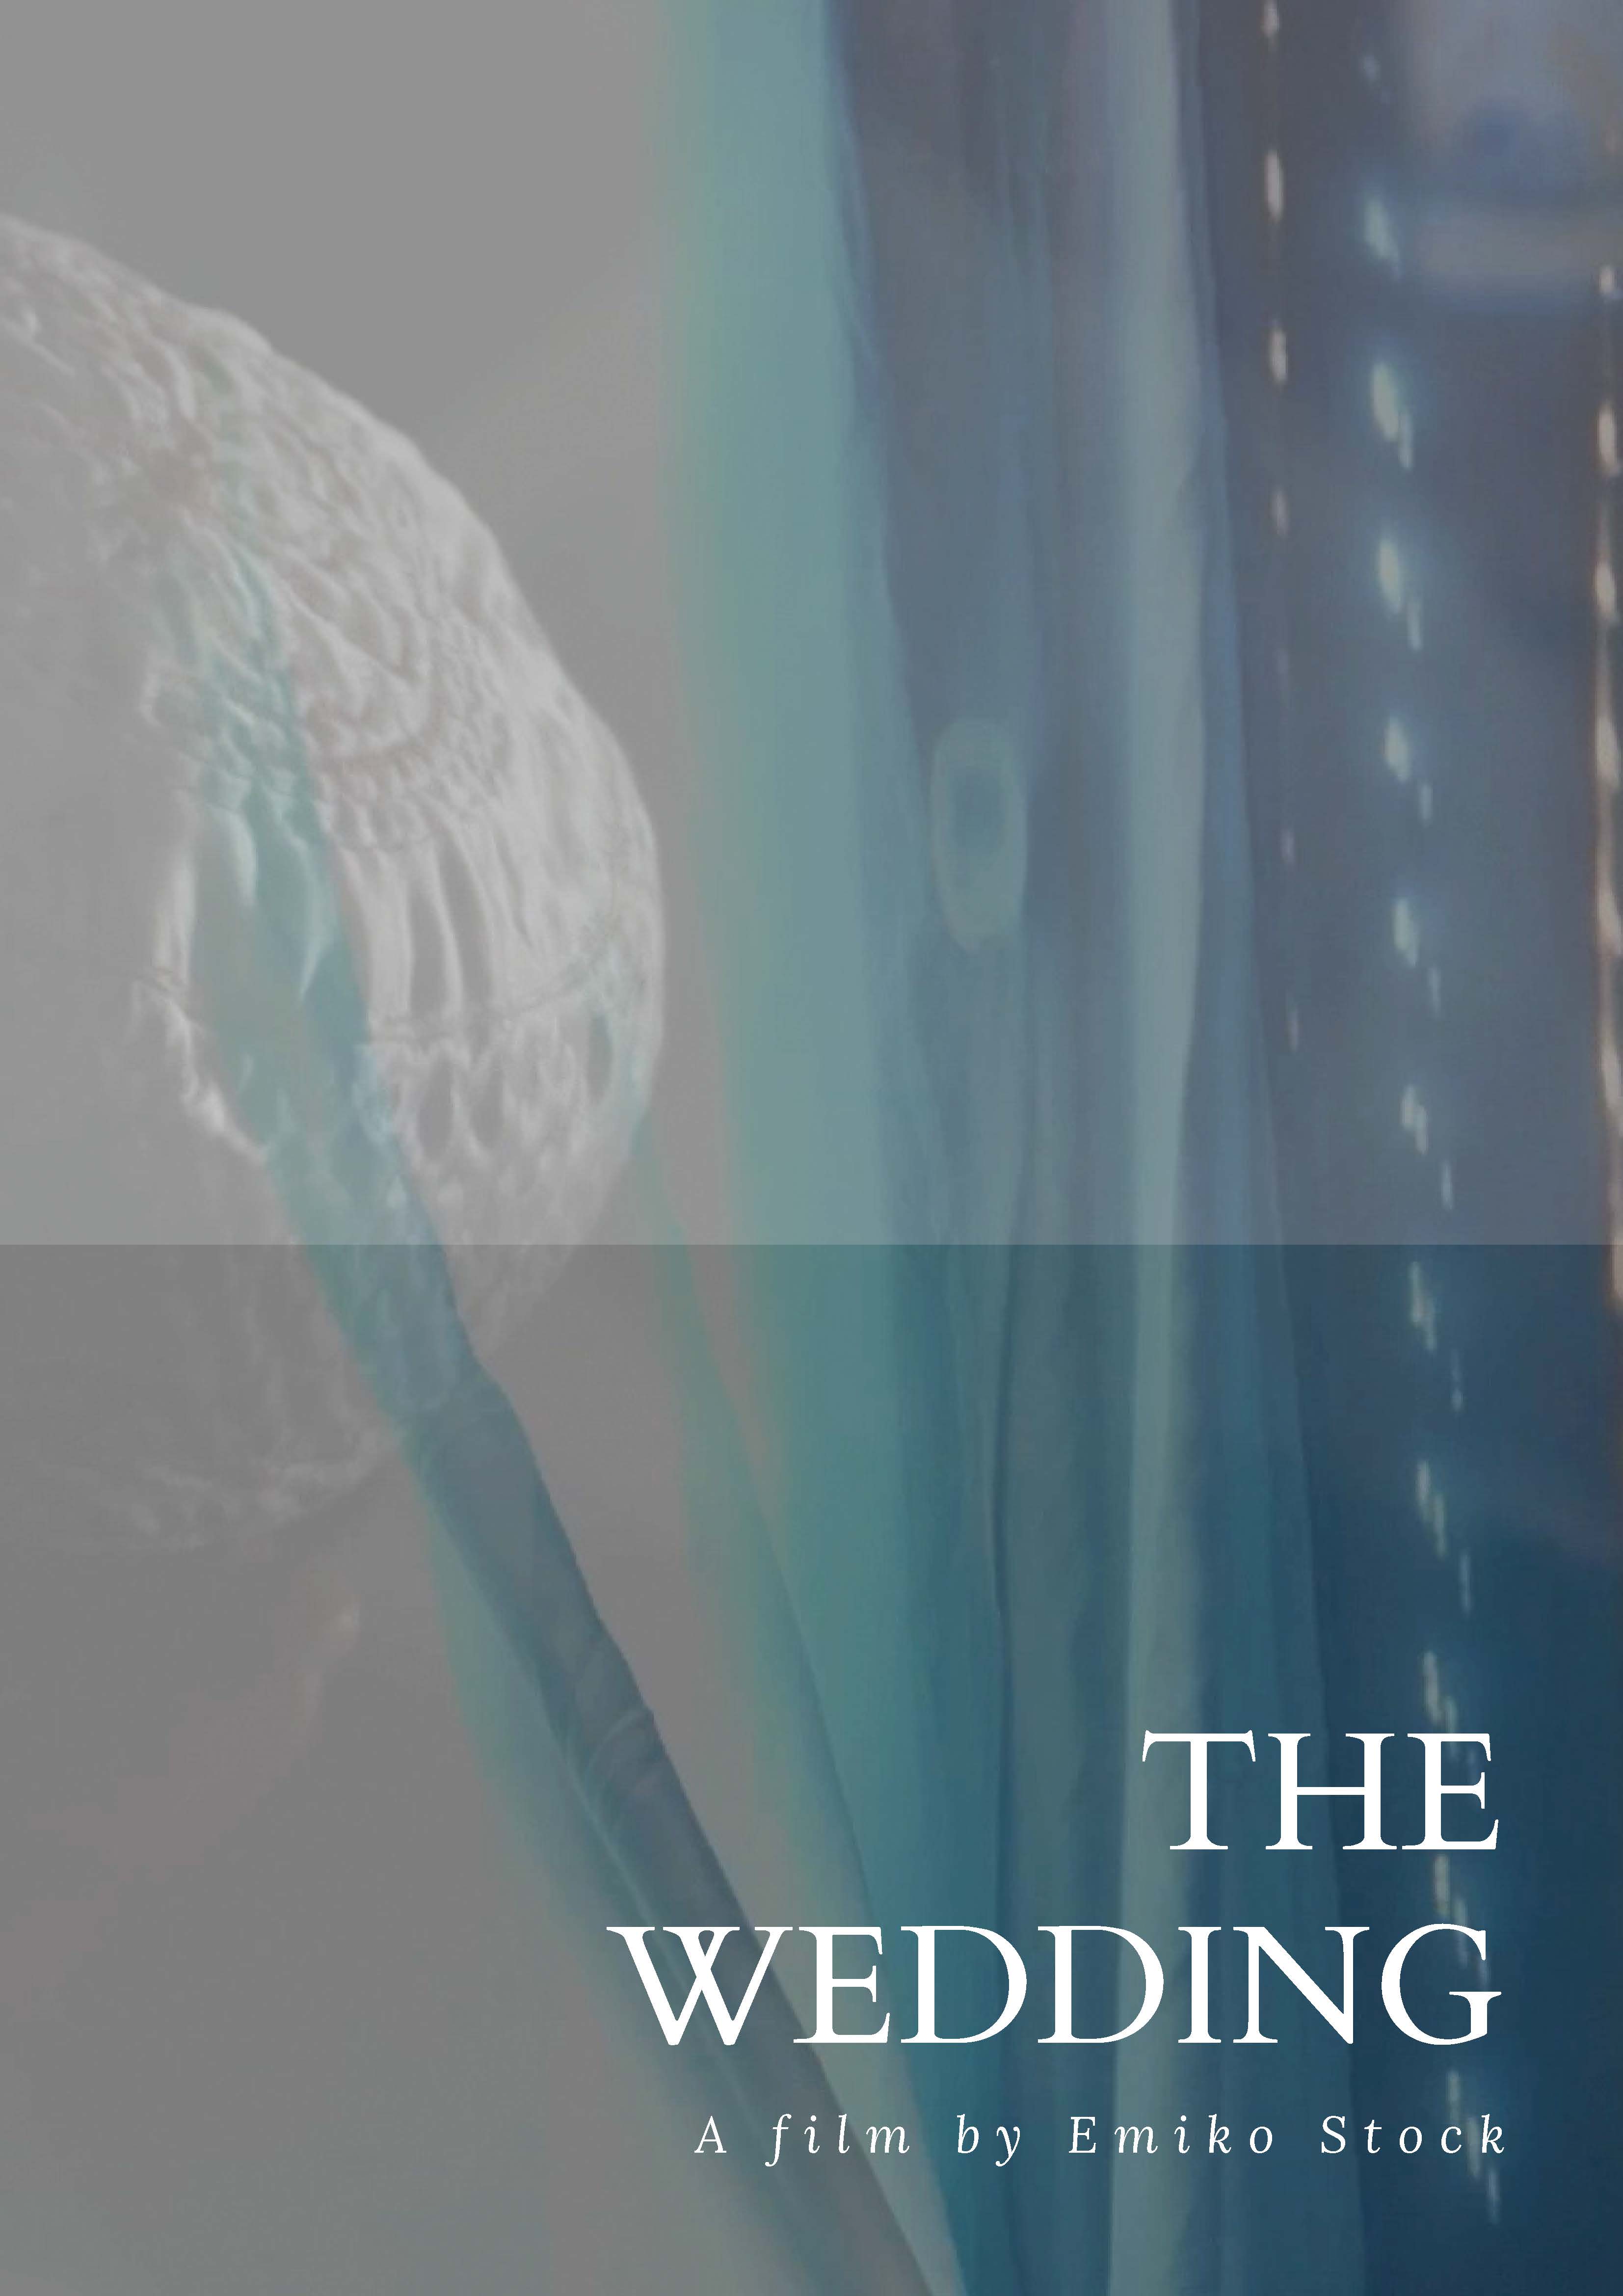 The wedding film poster